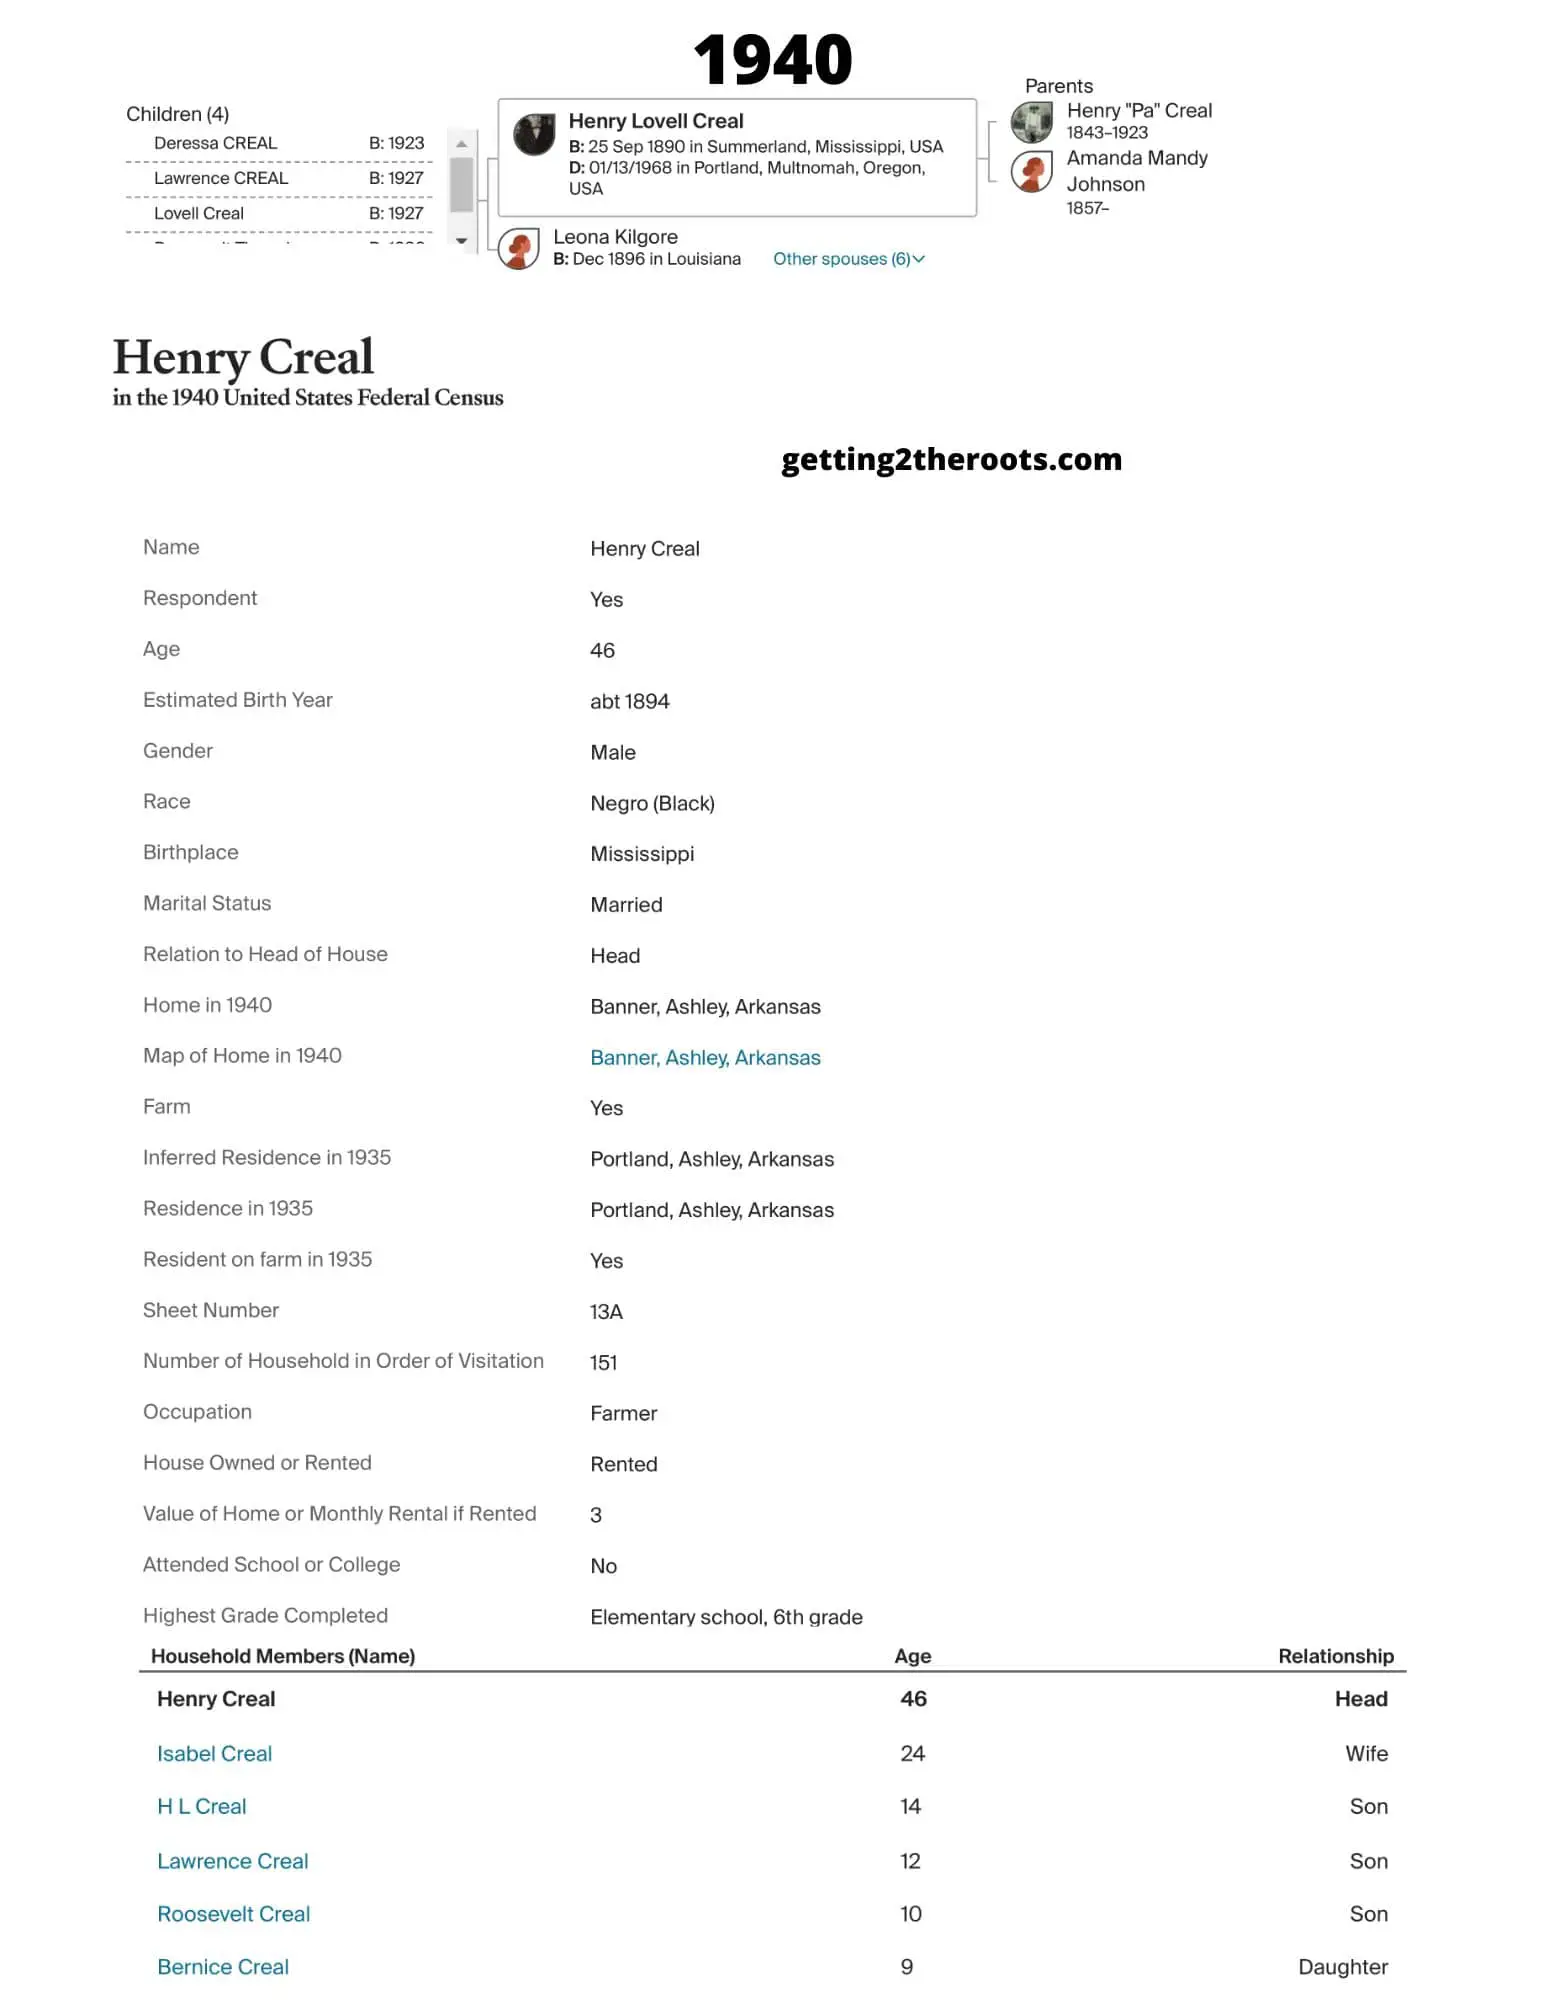 The 1940 Census for my grandfather, Henry, was used in my article, "The Life Story Of My Grandfather Henry Lovell Creal, Jr."